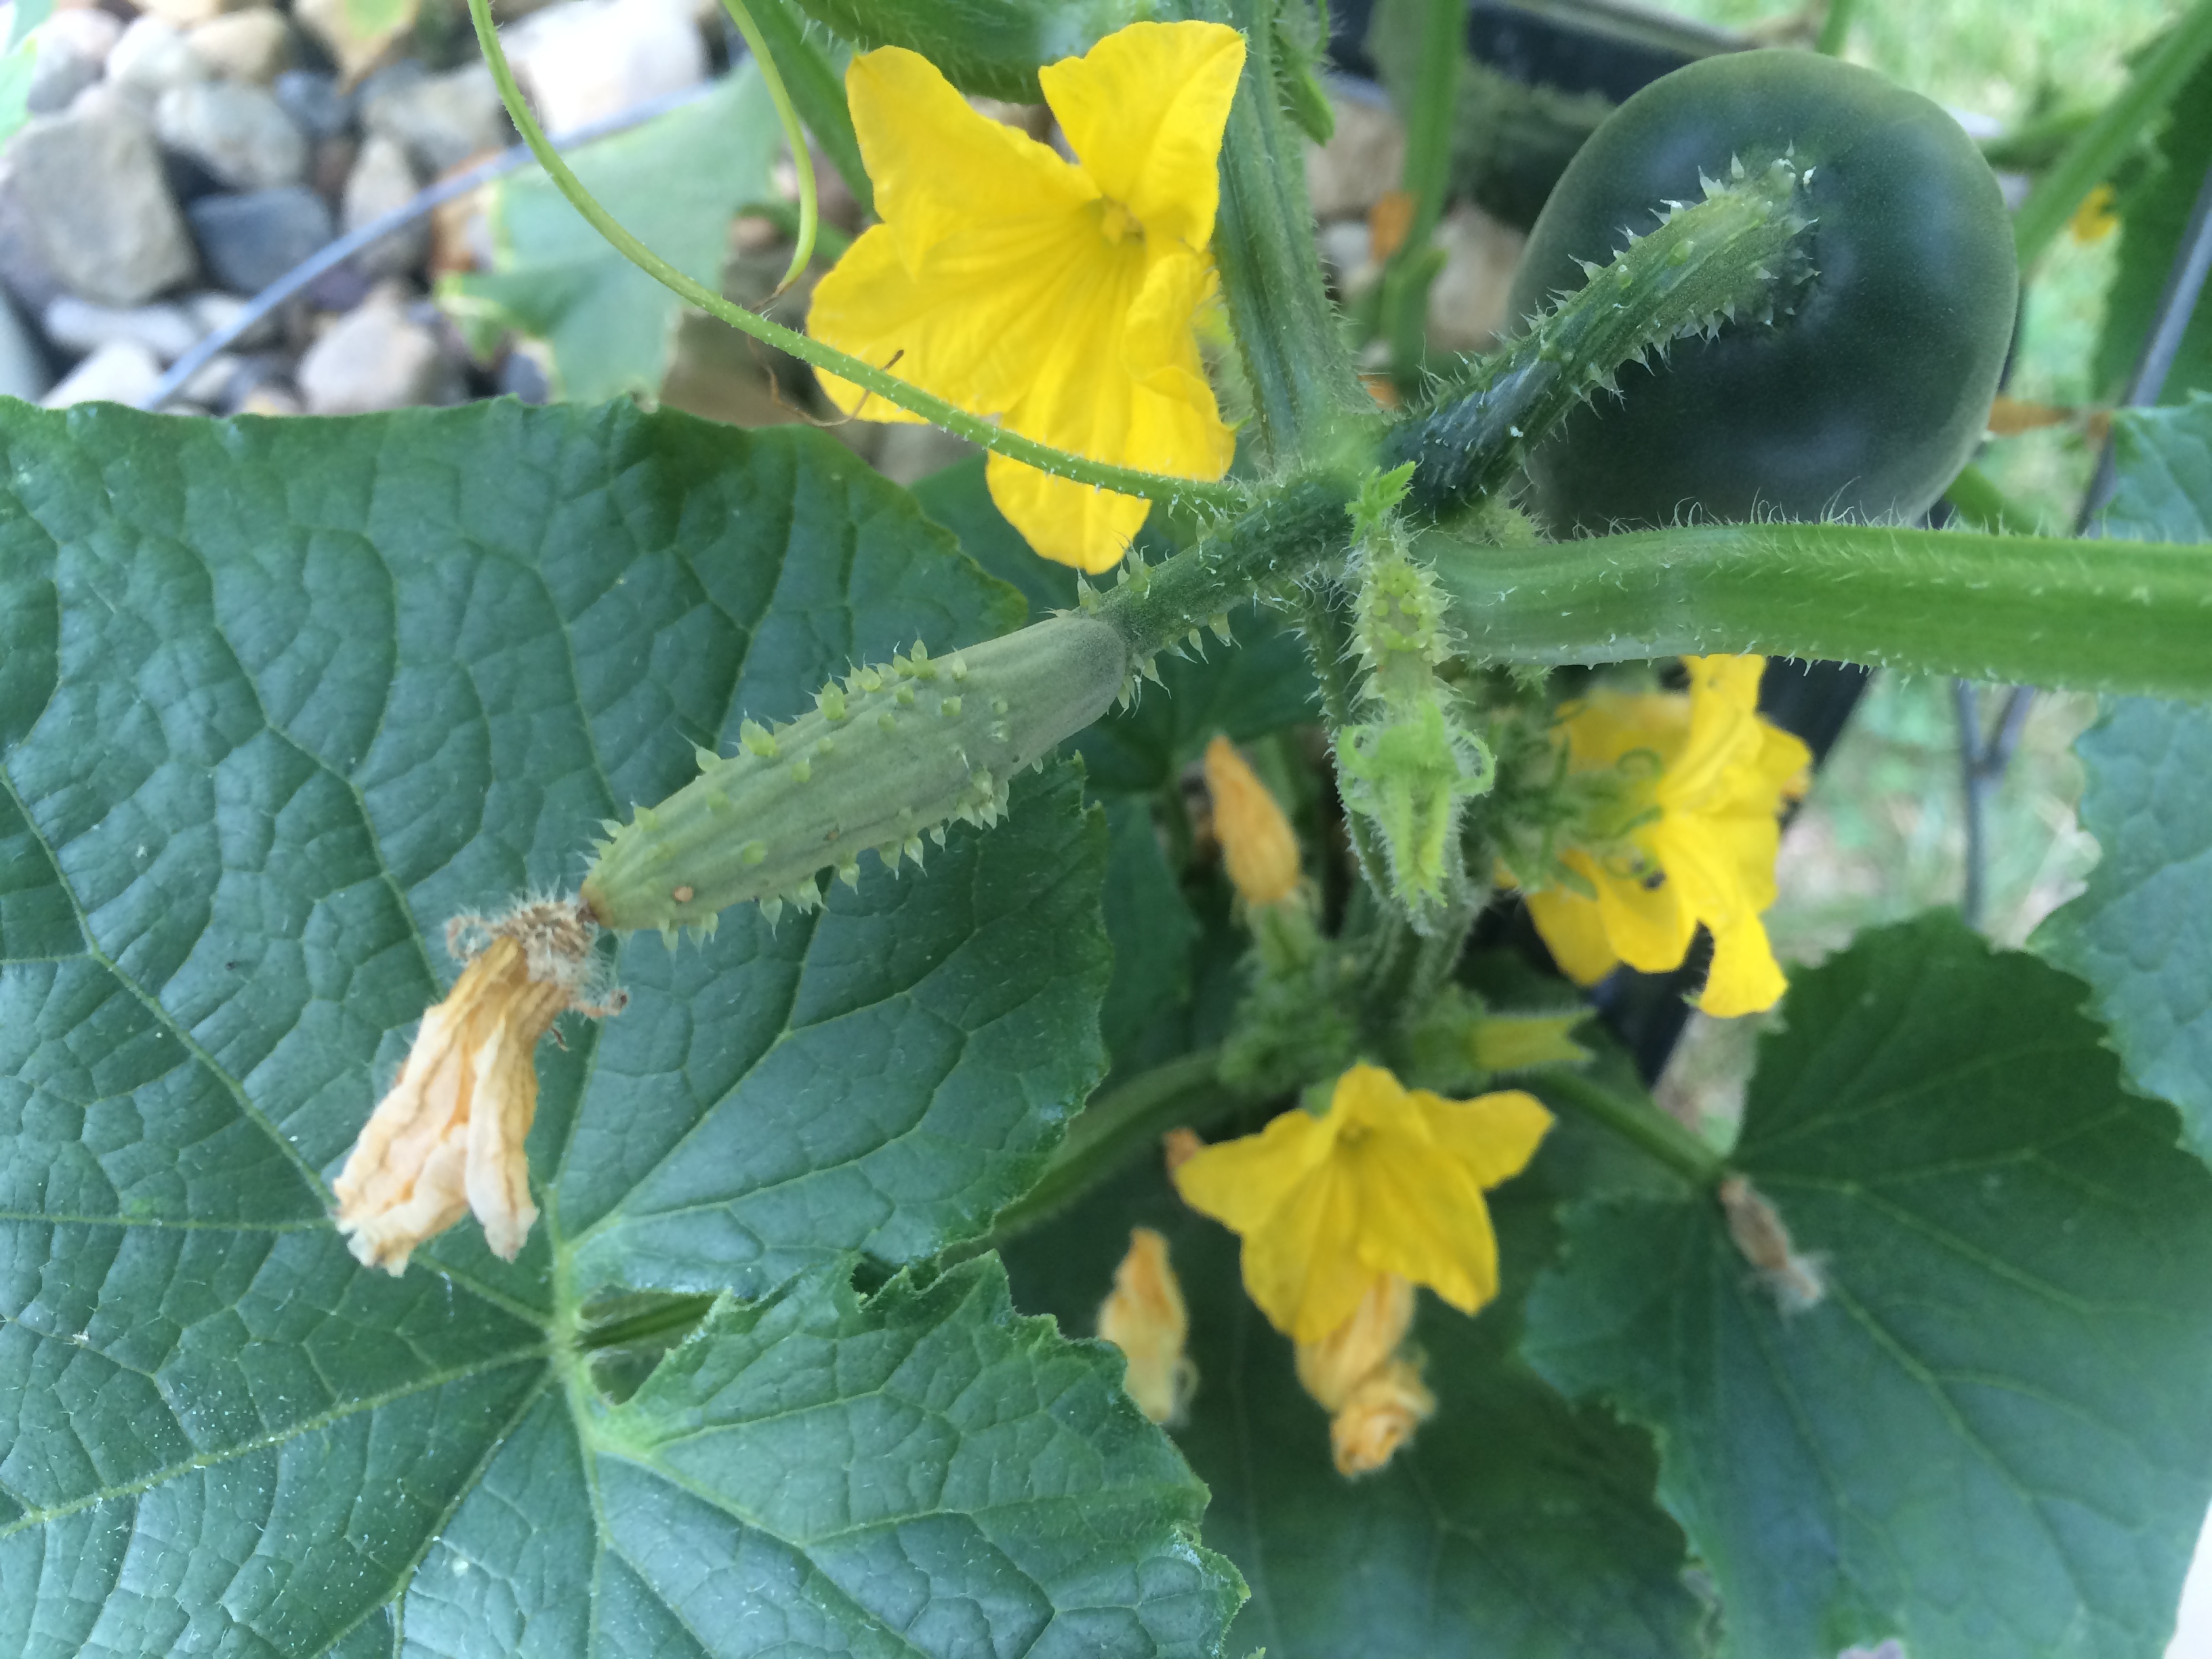 Hydroponic cucumbers forming - NoSoilSolutions